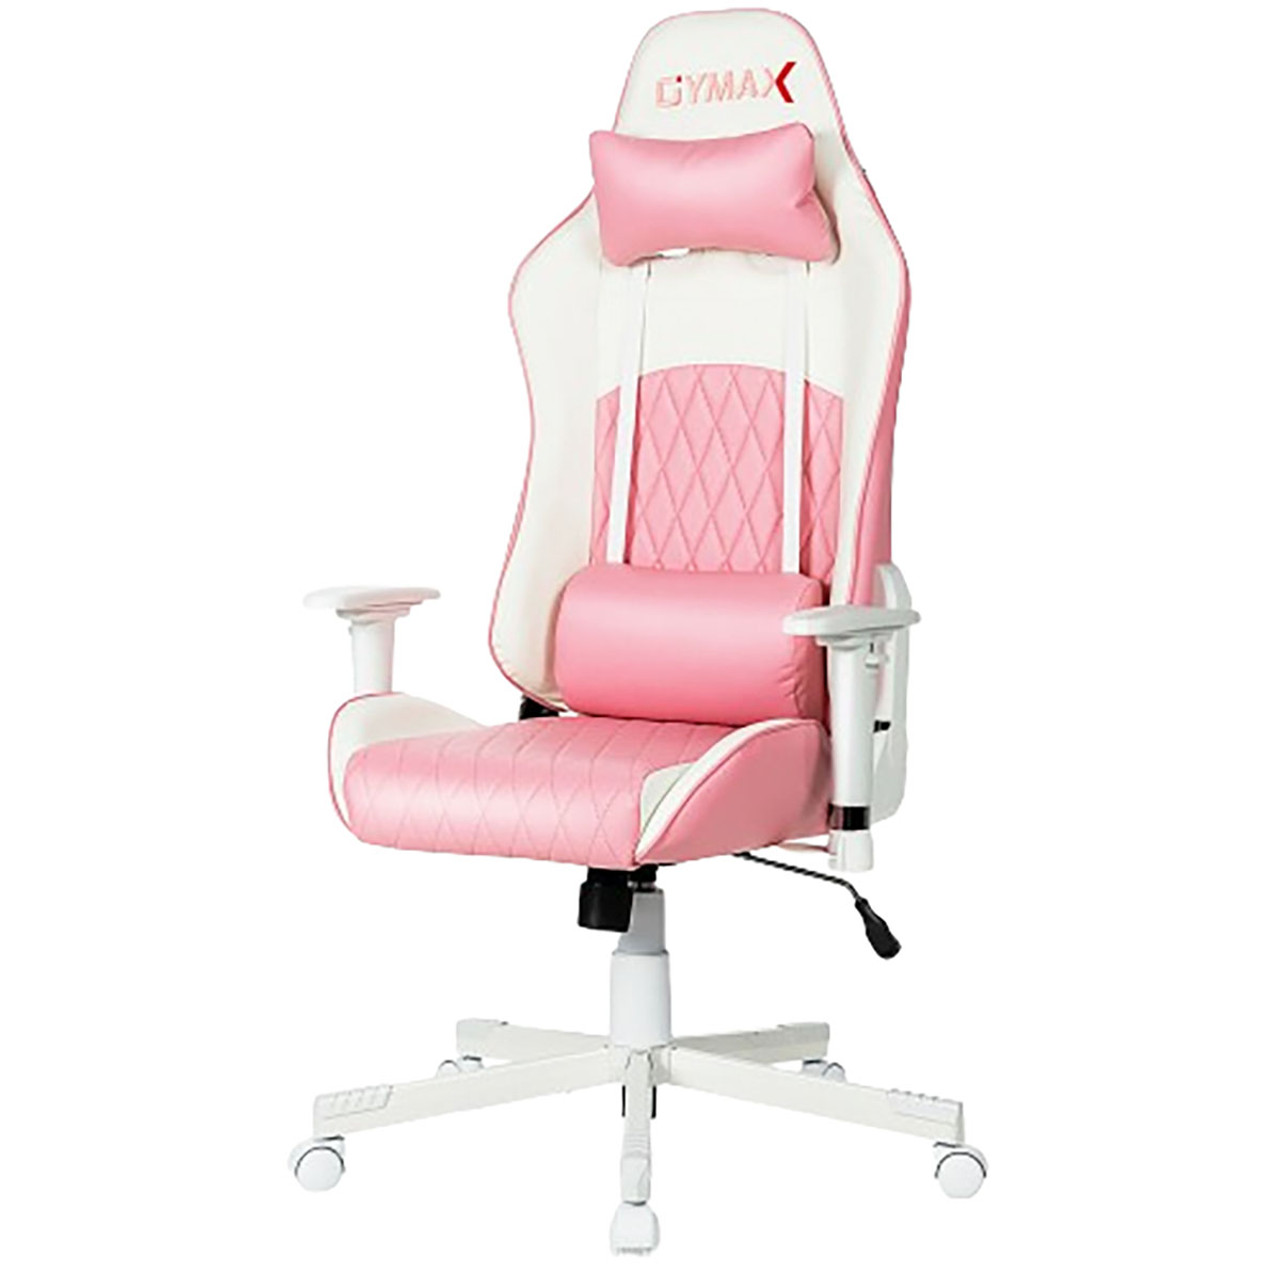 Ergonomic High-Back Swivel Gaming Chair with Headrest & Lumbar Support product image